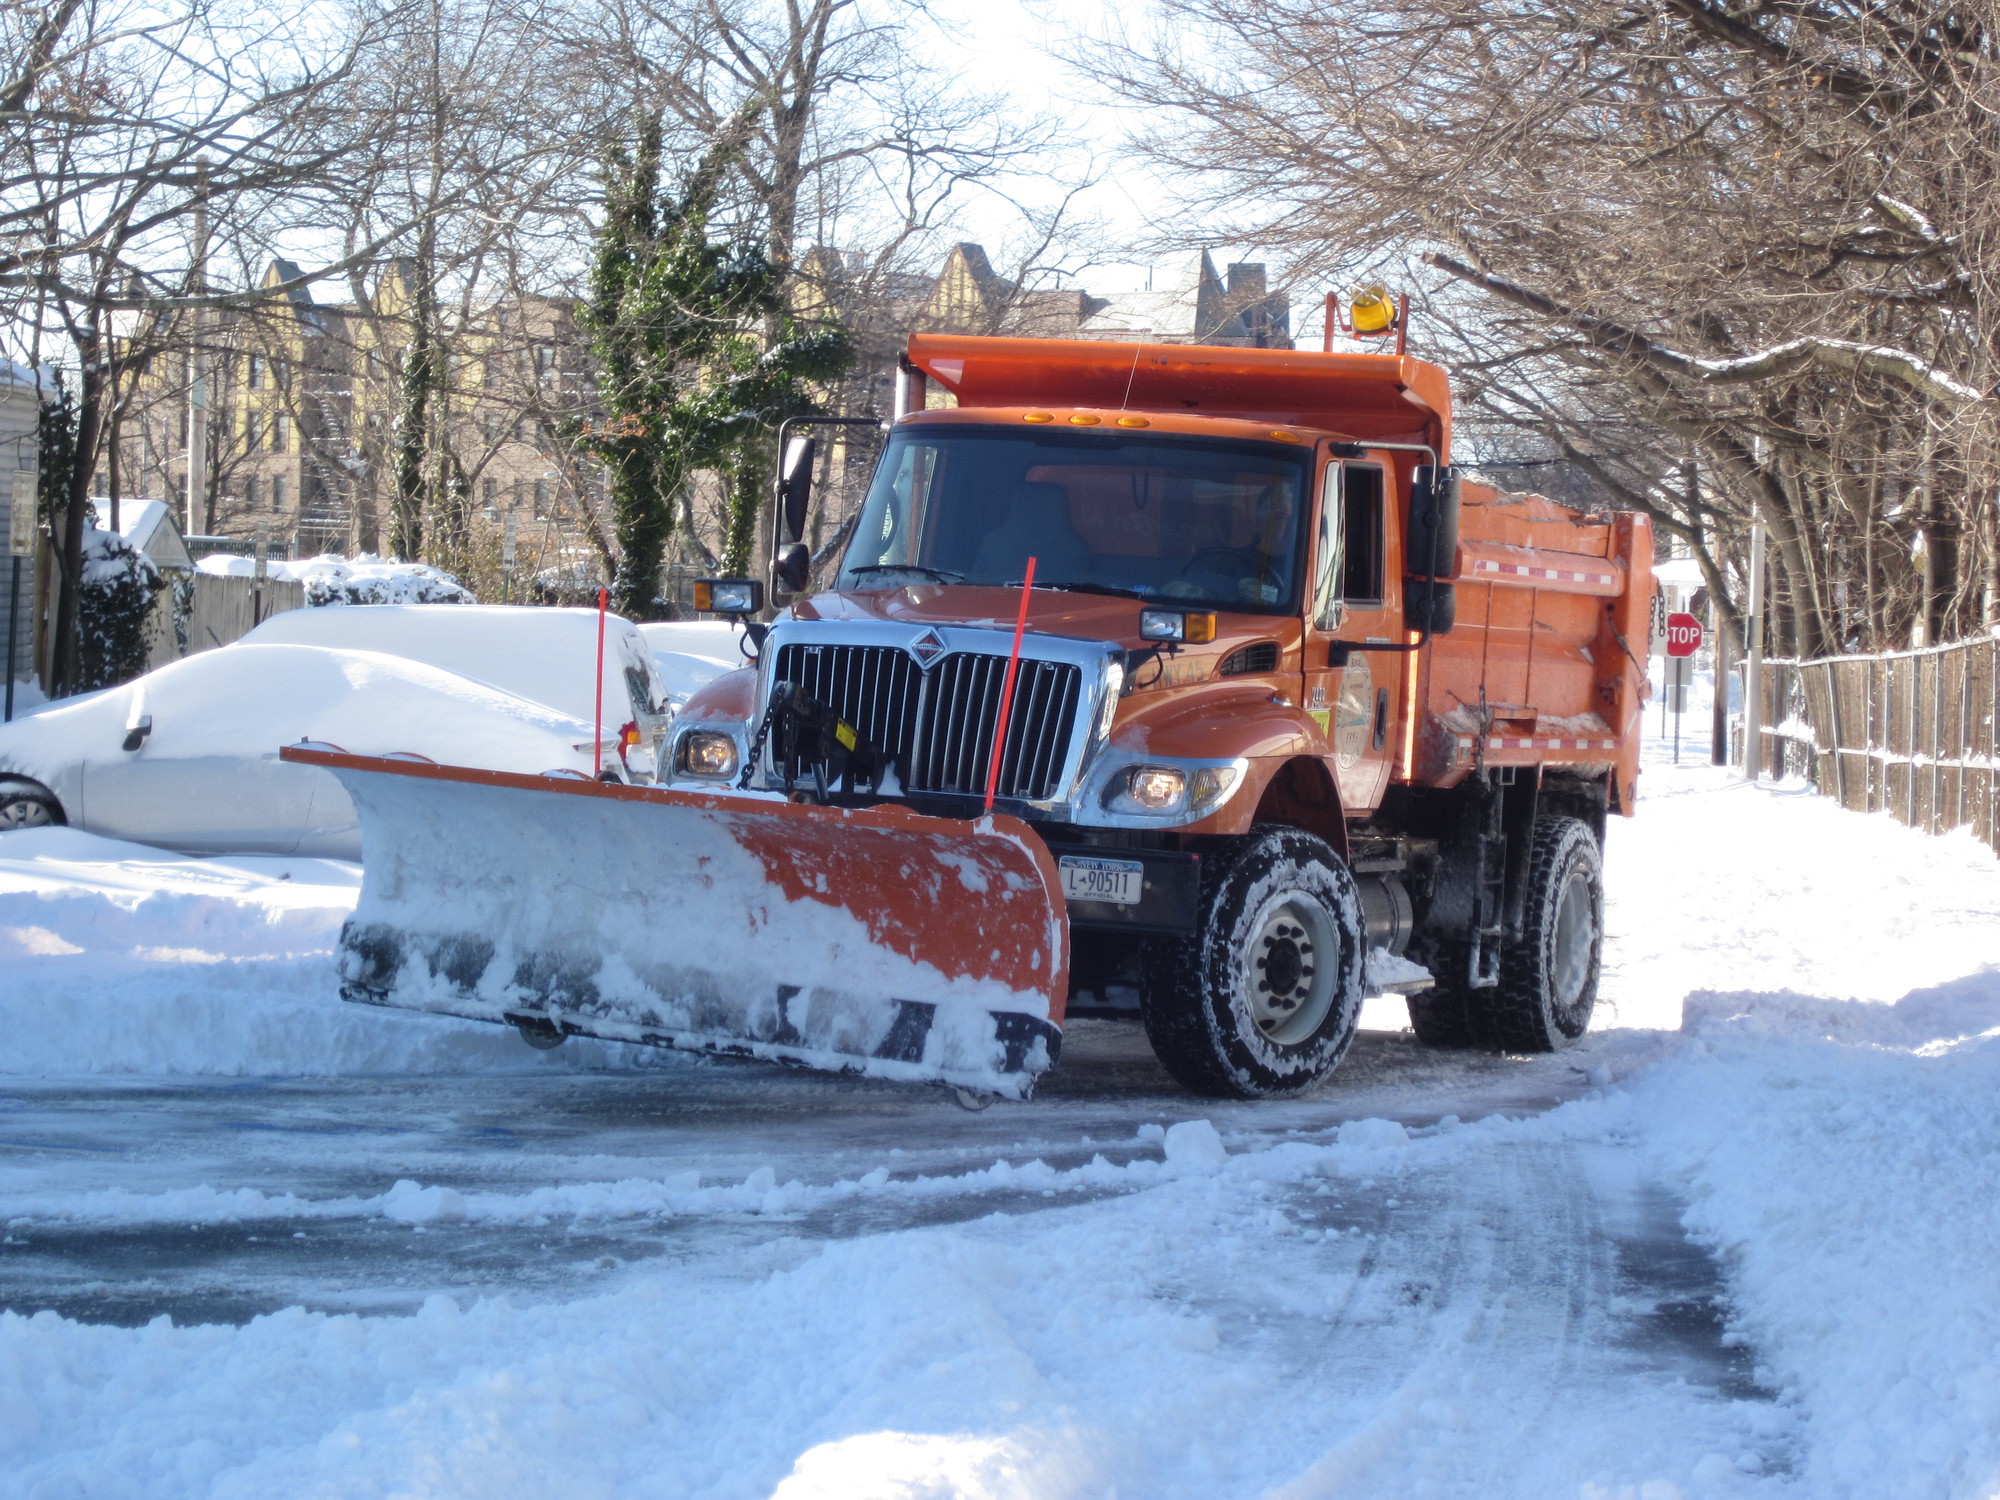 Rockville Centre plows will be out in force when the snow starts to fall until hours afterward, making sure the 50 miles of village streets are clear.